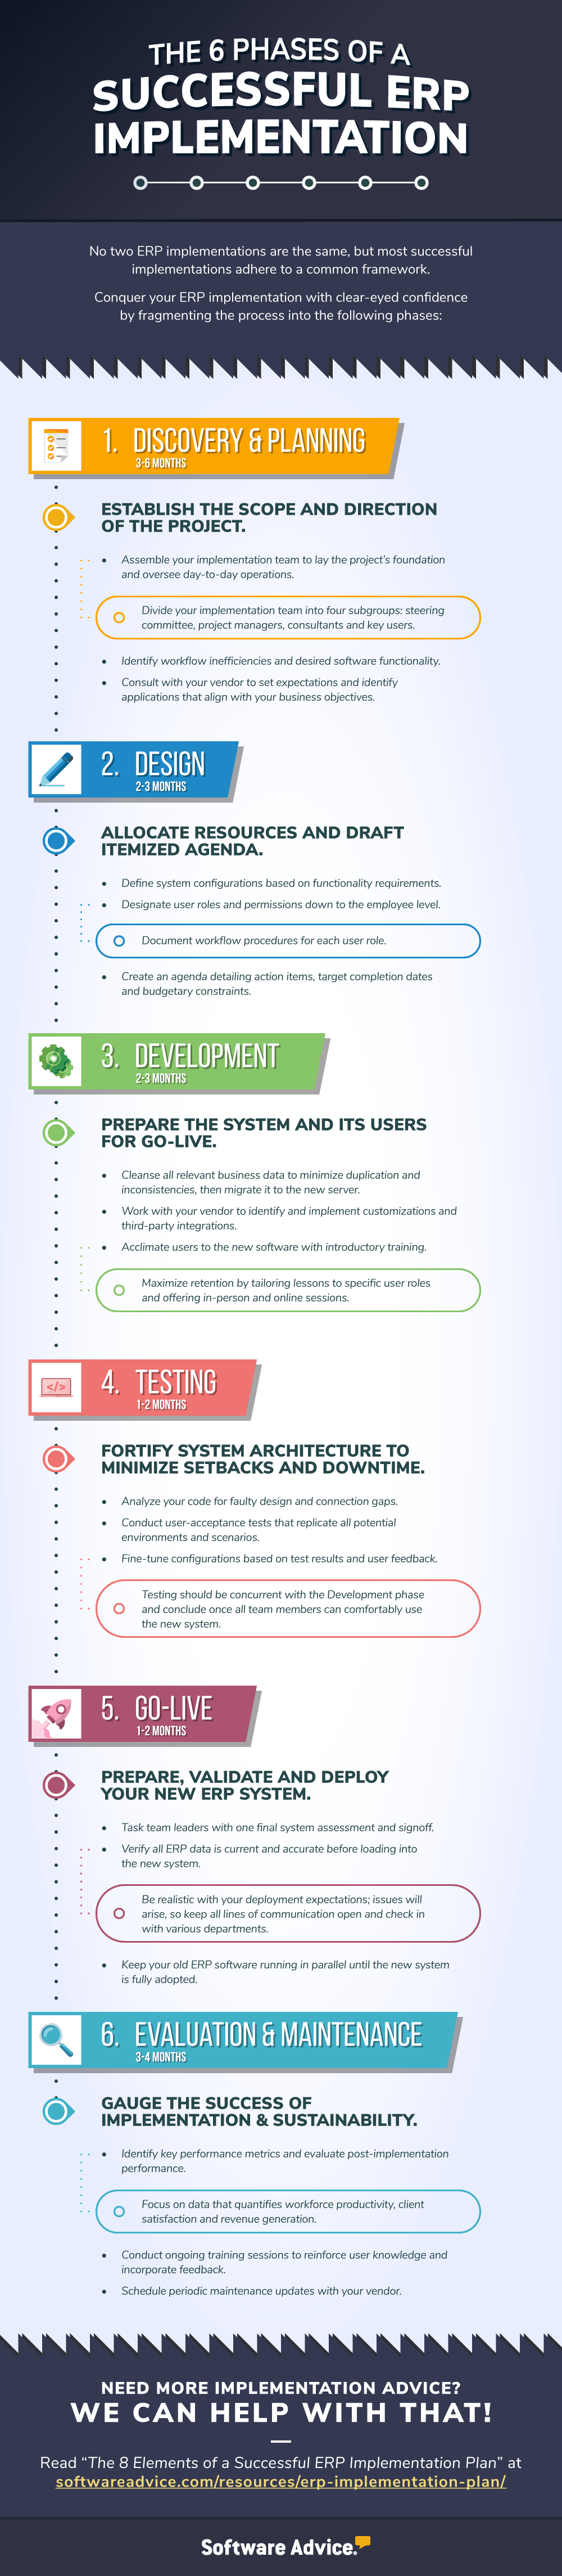 erp-implementation-phases-infographic